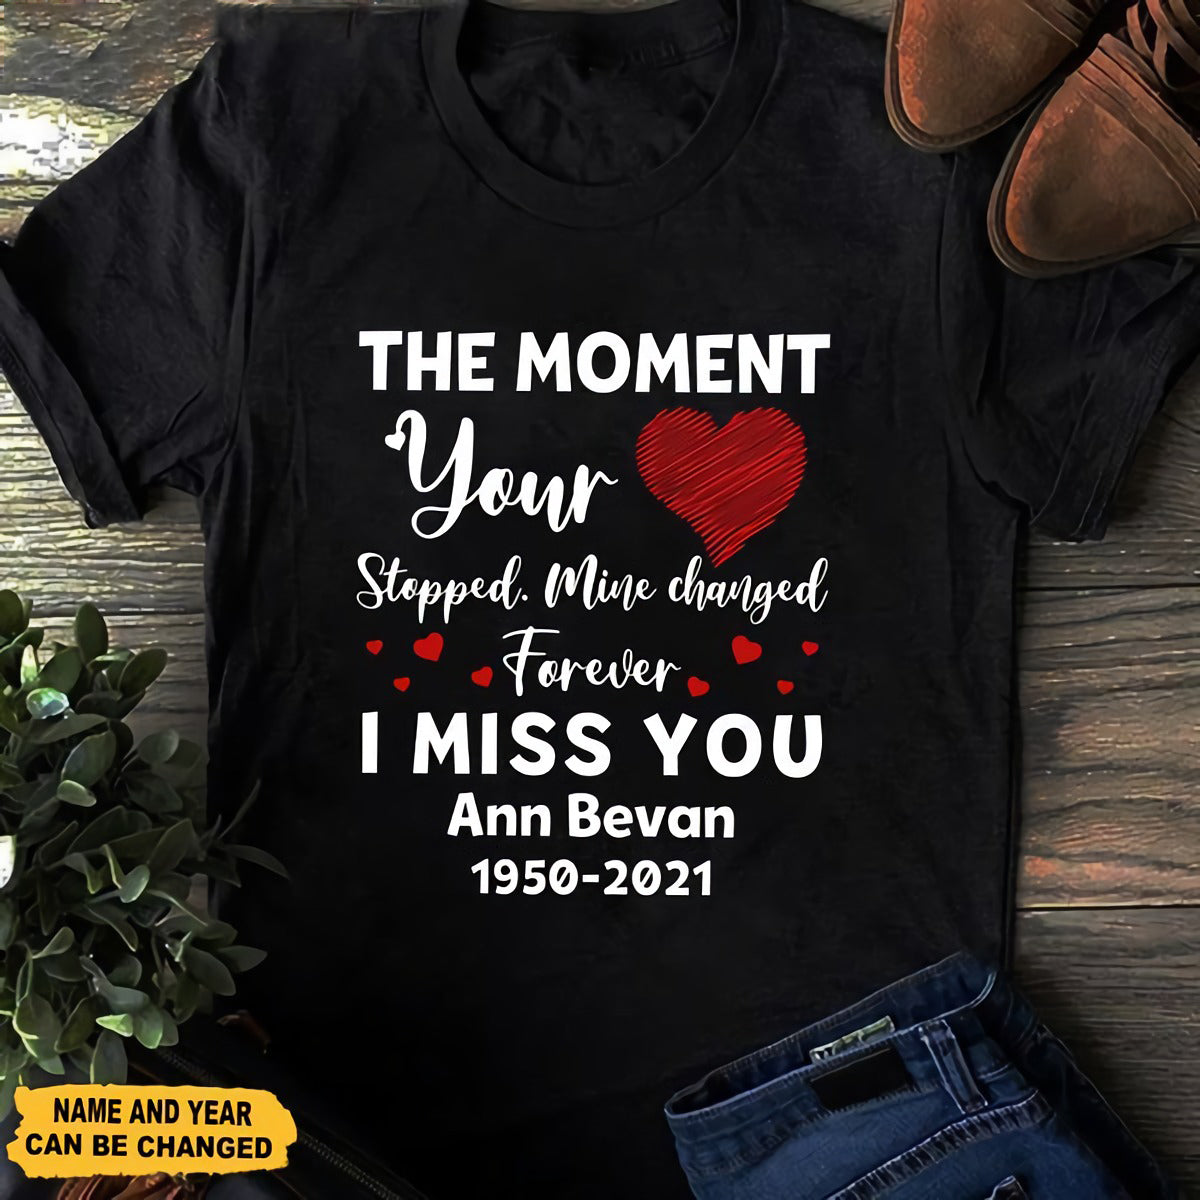 The Moment Your Heart Stopped - Personalized Custom T-shirt